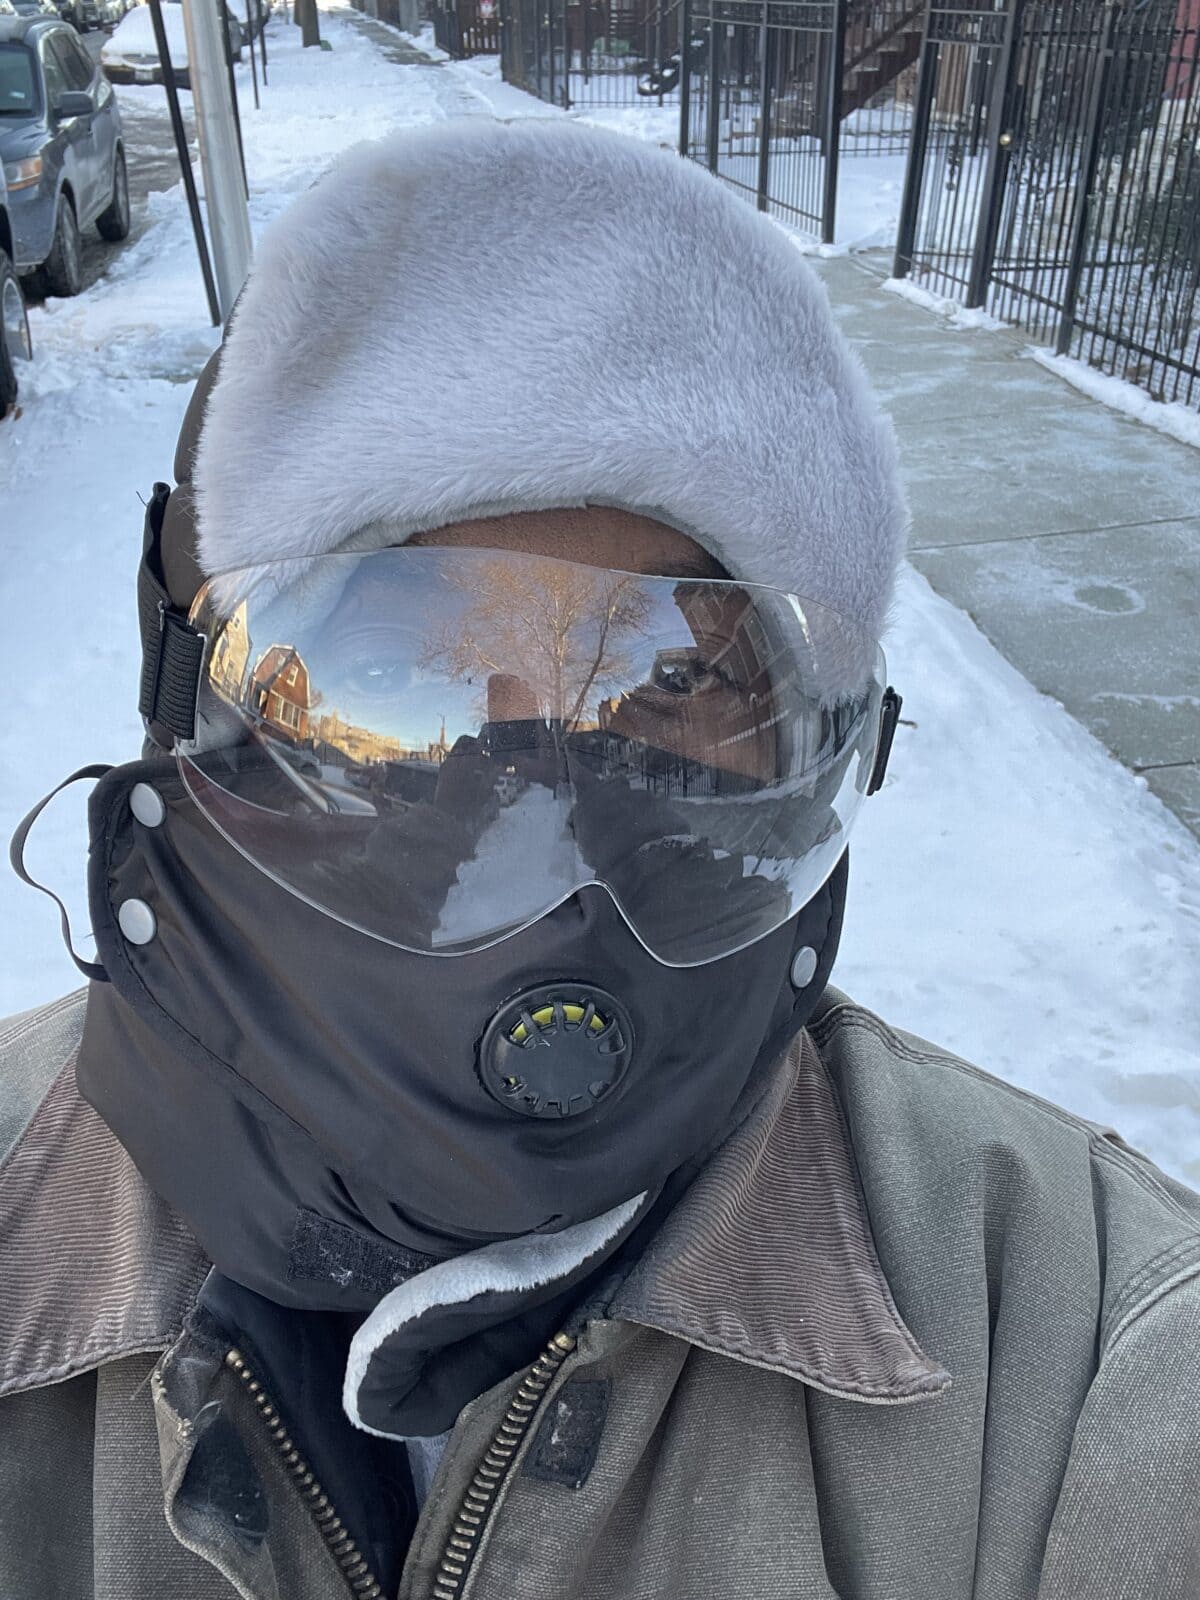 Black man wearing a winter coat and hat, mask, and clear eye guard stands in front of a sidewalk that has been cleared of snow.